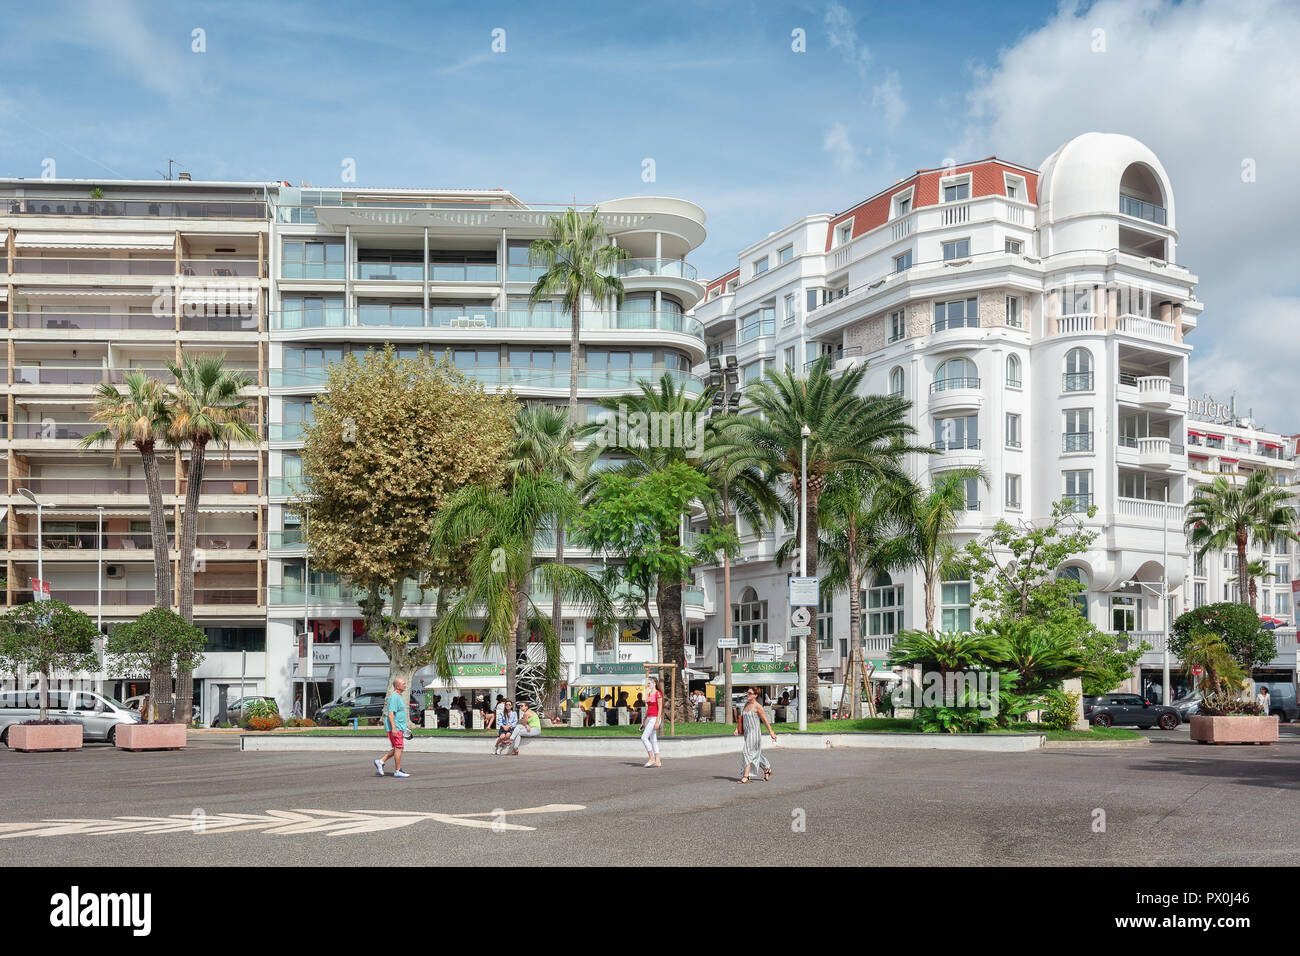 Cannes, France, September 15, 2018: Apartment buildings and the side of the well known hotel  Majestic Barriere along the famous boulevard de la Crois Stock Photo